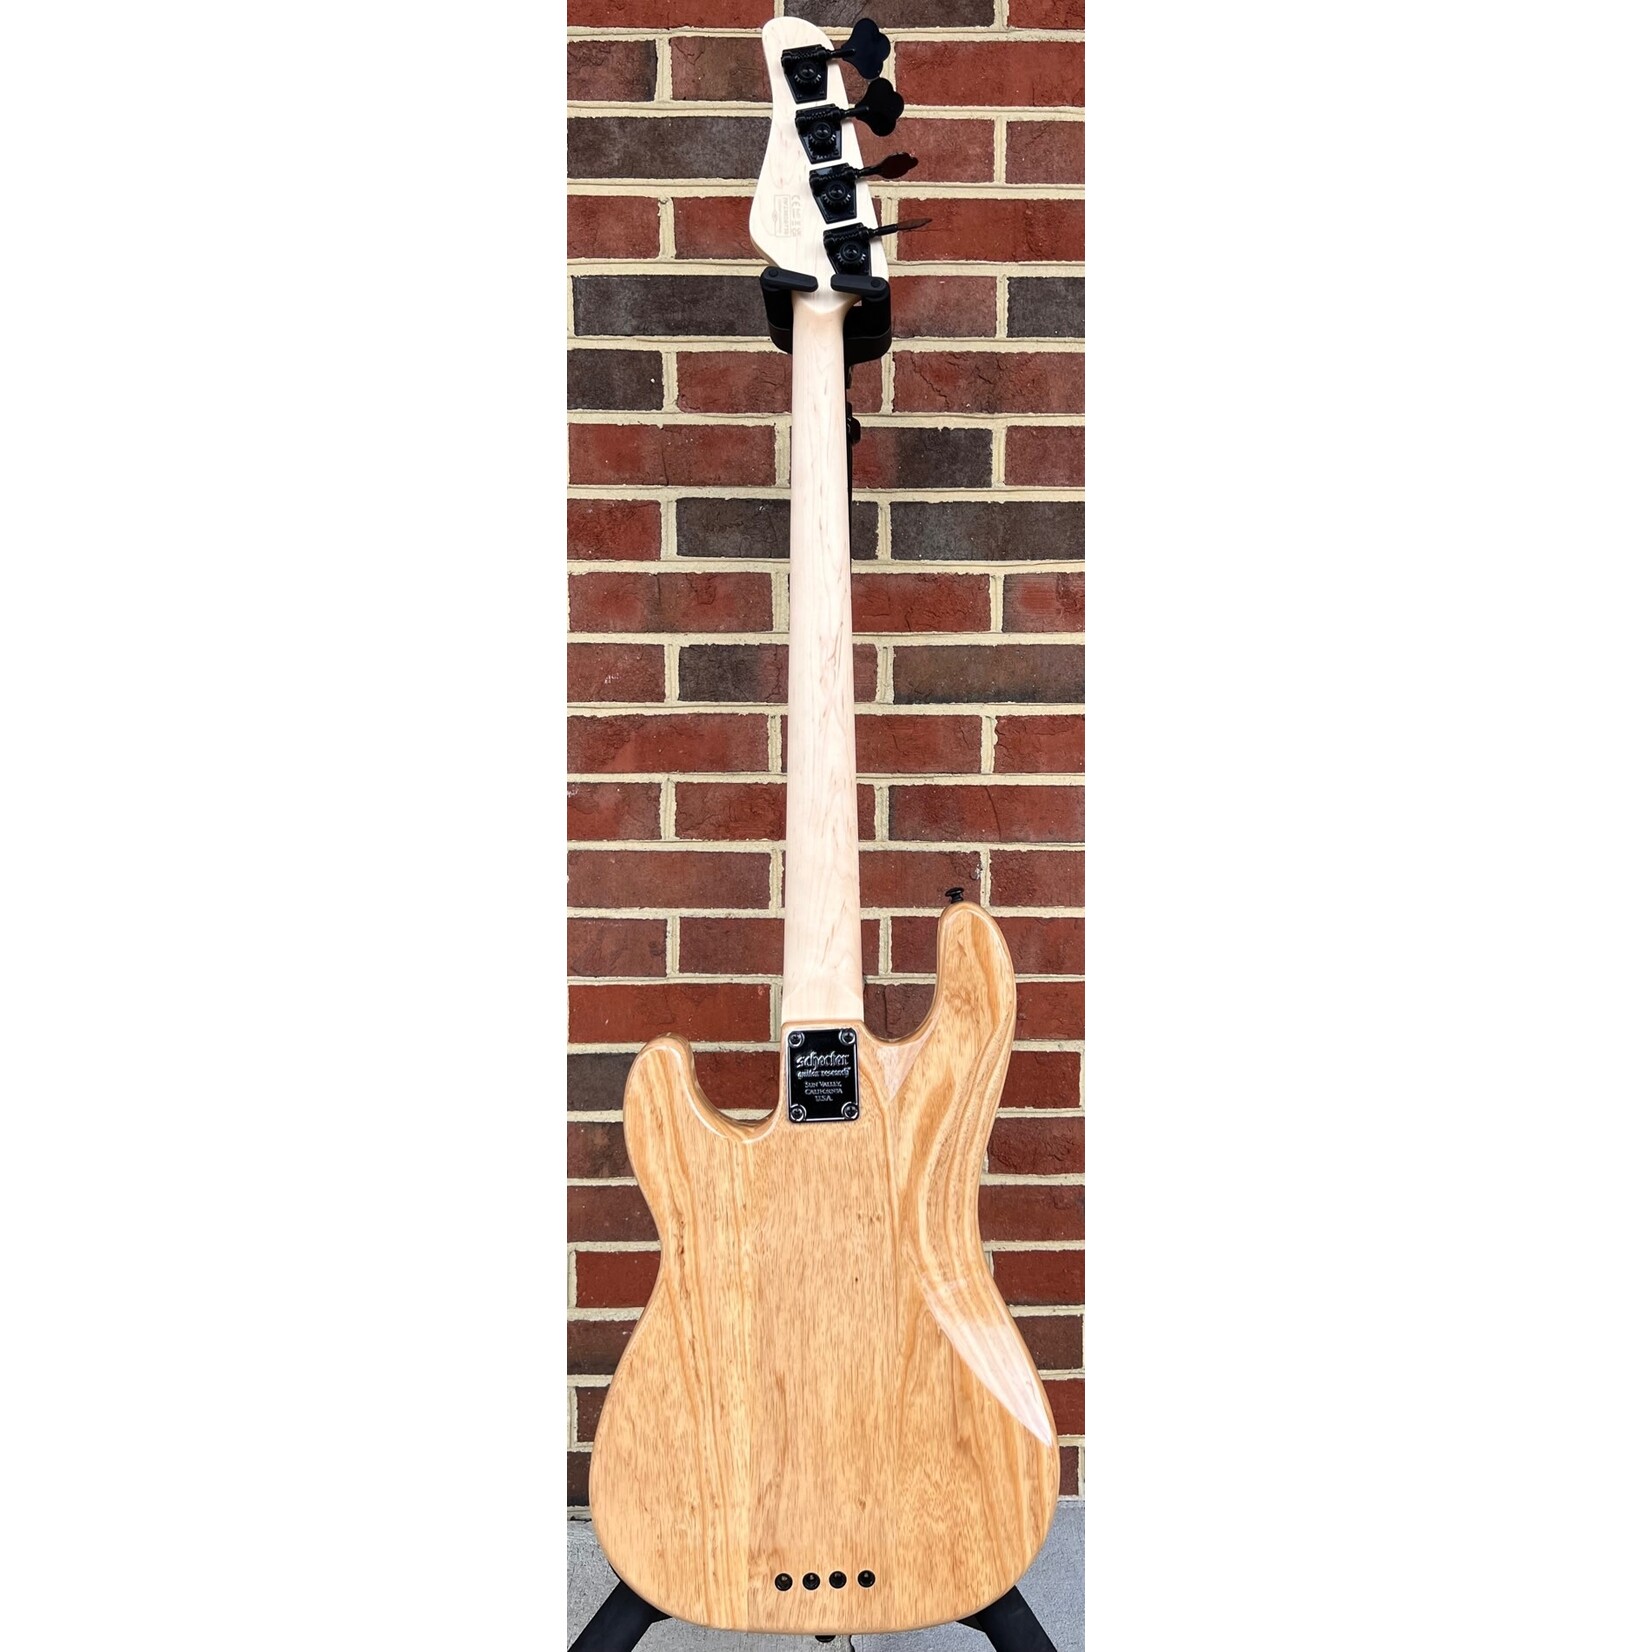 Schecter Guitar Research Schecter Justin Beck V Ani, Gloss Natural, Swamp Ash Body, Maple Neck & Fretboard, Block Inlays, D'Addario Auto-Trim Locking Tuners, SN# IW23050738